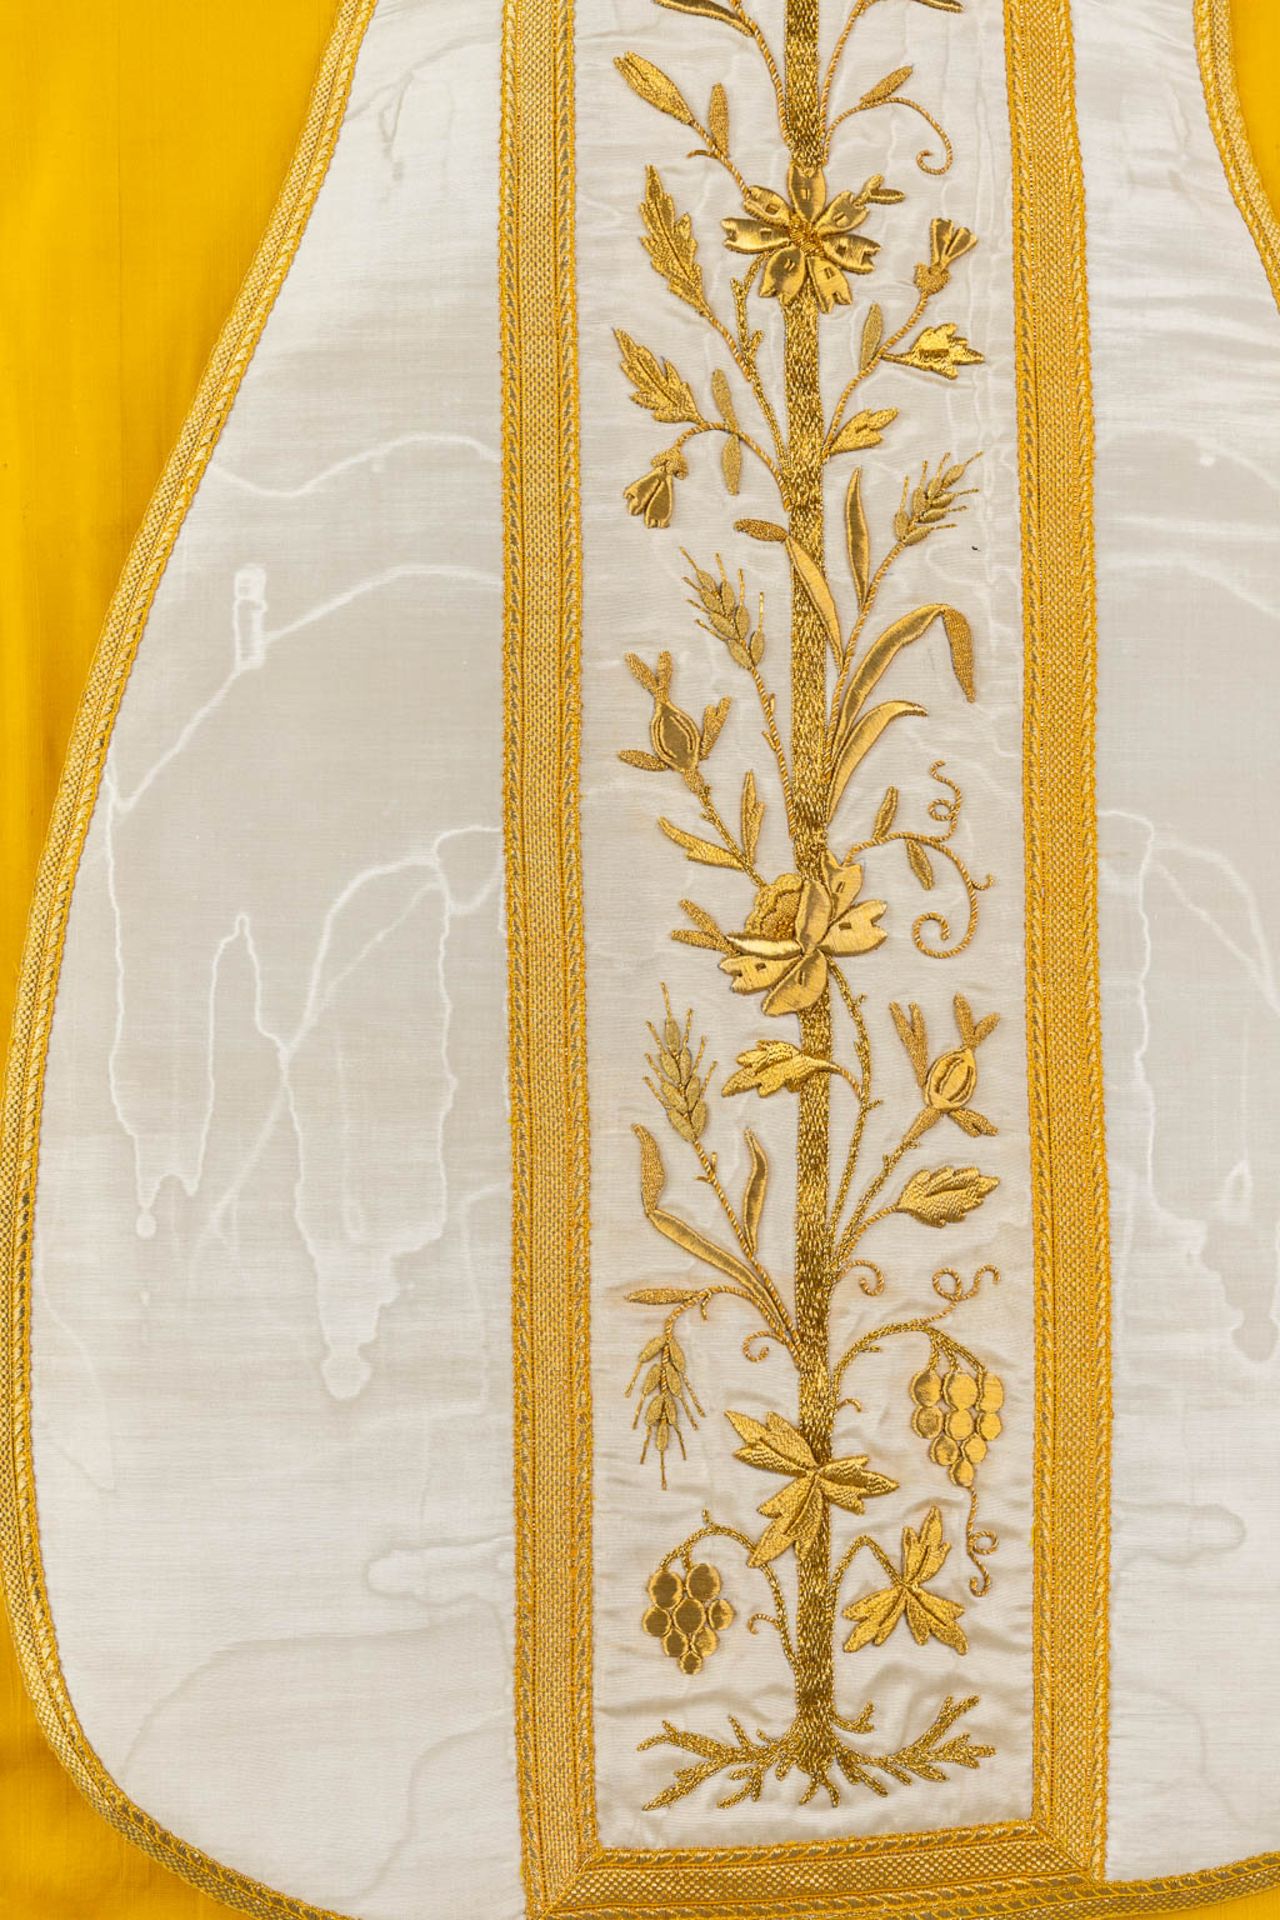 A set of Lithurgical Robes and accessories. Thick gold thread and embroideries. - Image 19 of 40